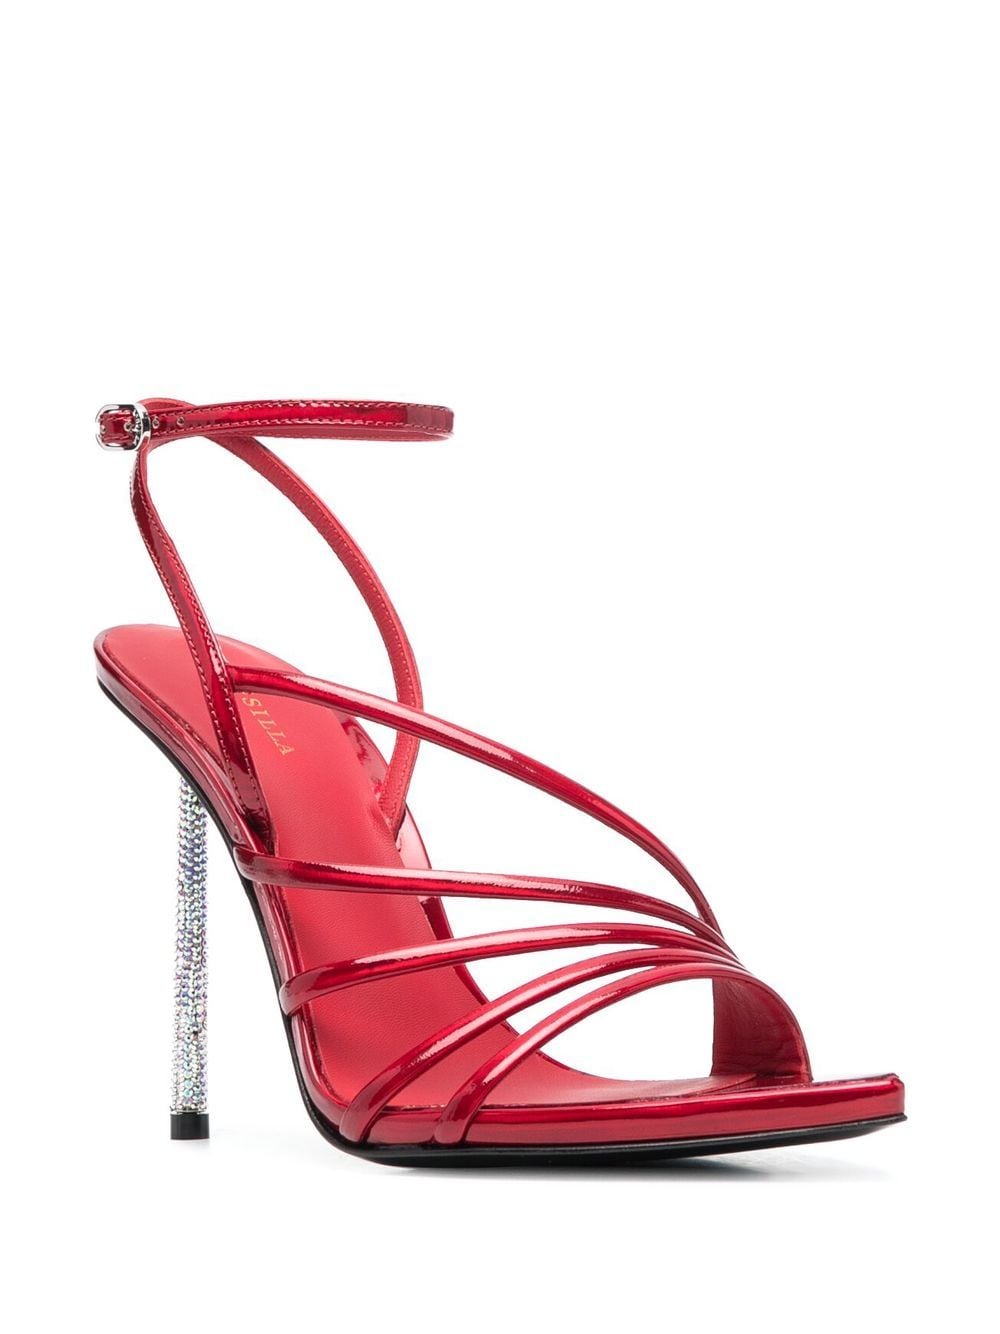 Shop Le Silla Bella 120mm Patent-leather Sandals In Red